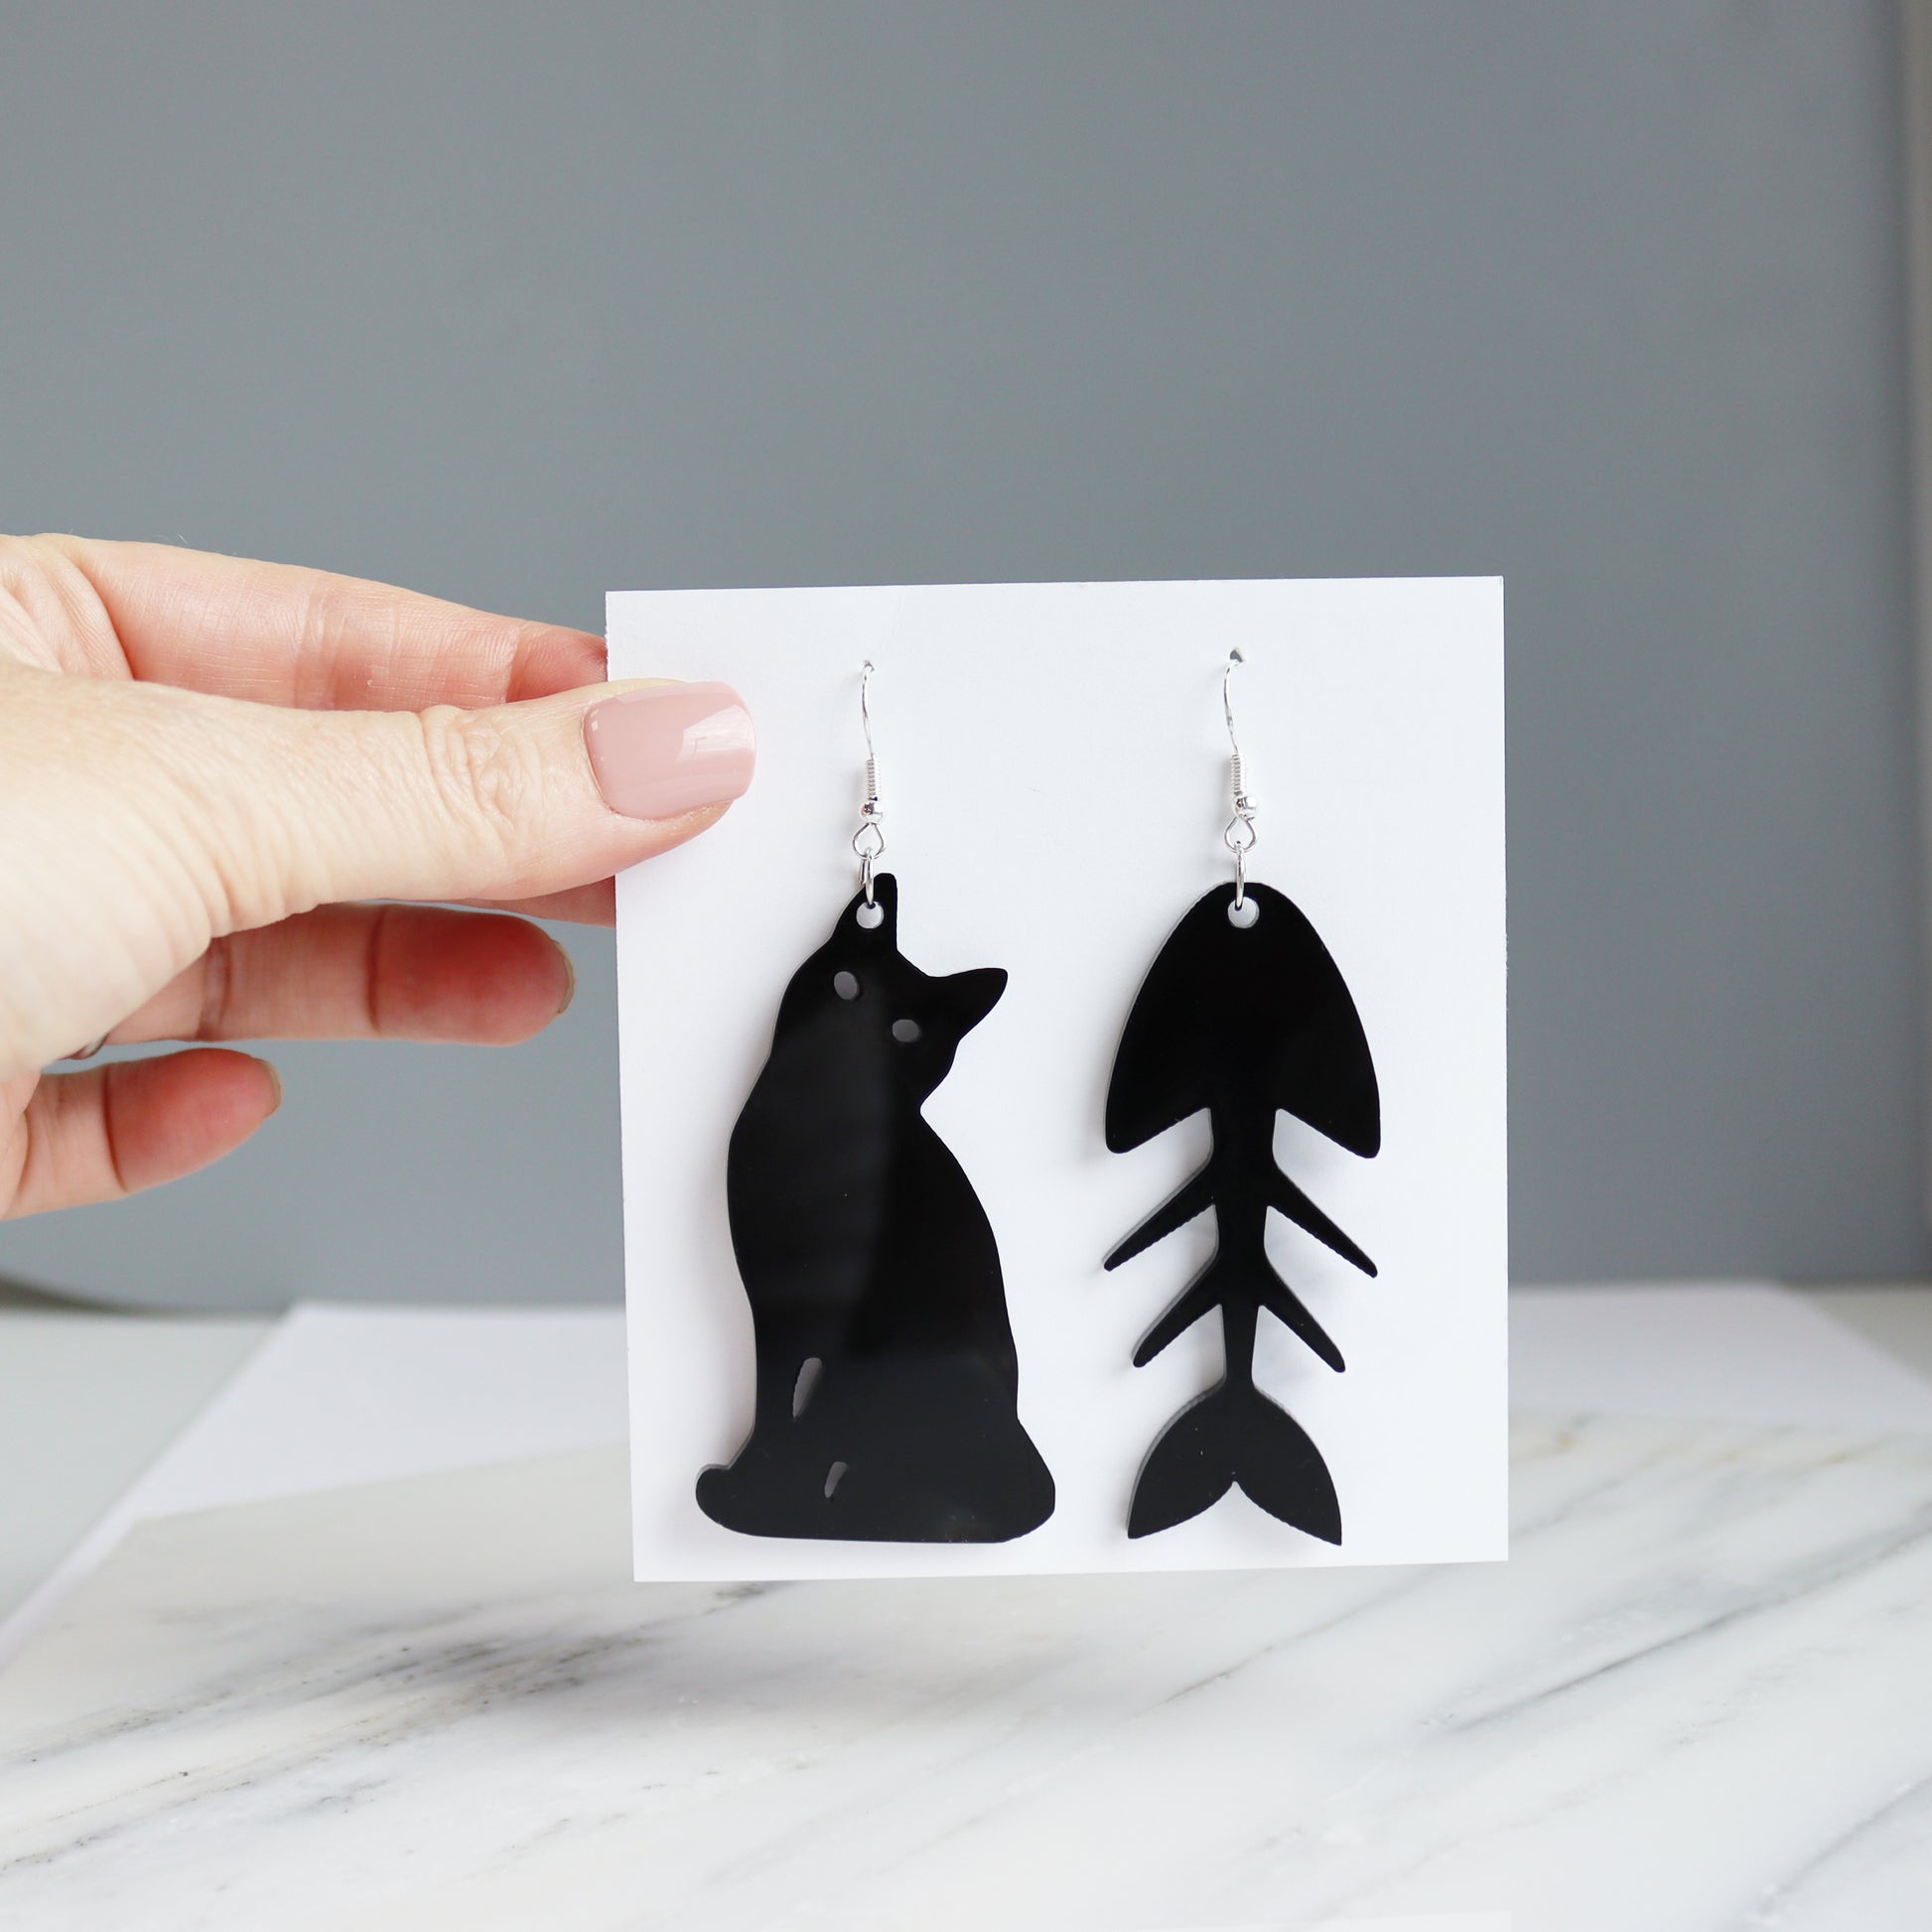 black cat and fish bone mismatches earrings cut from black acrylic perfect for Halloween party